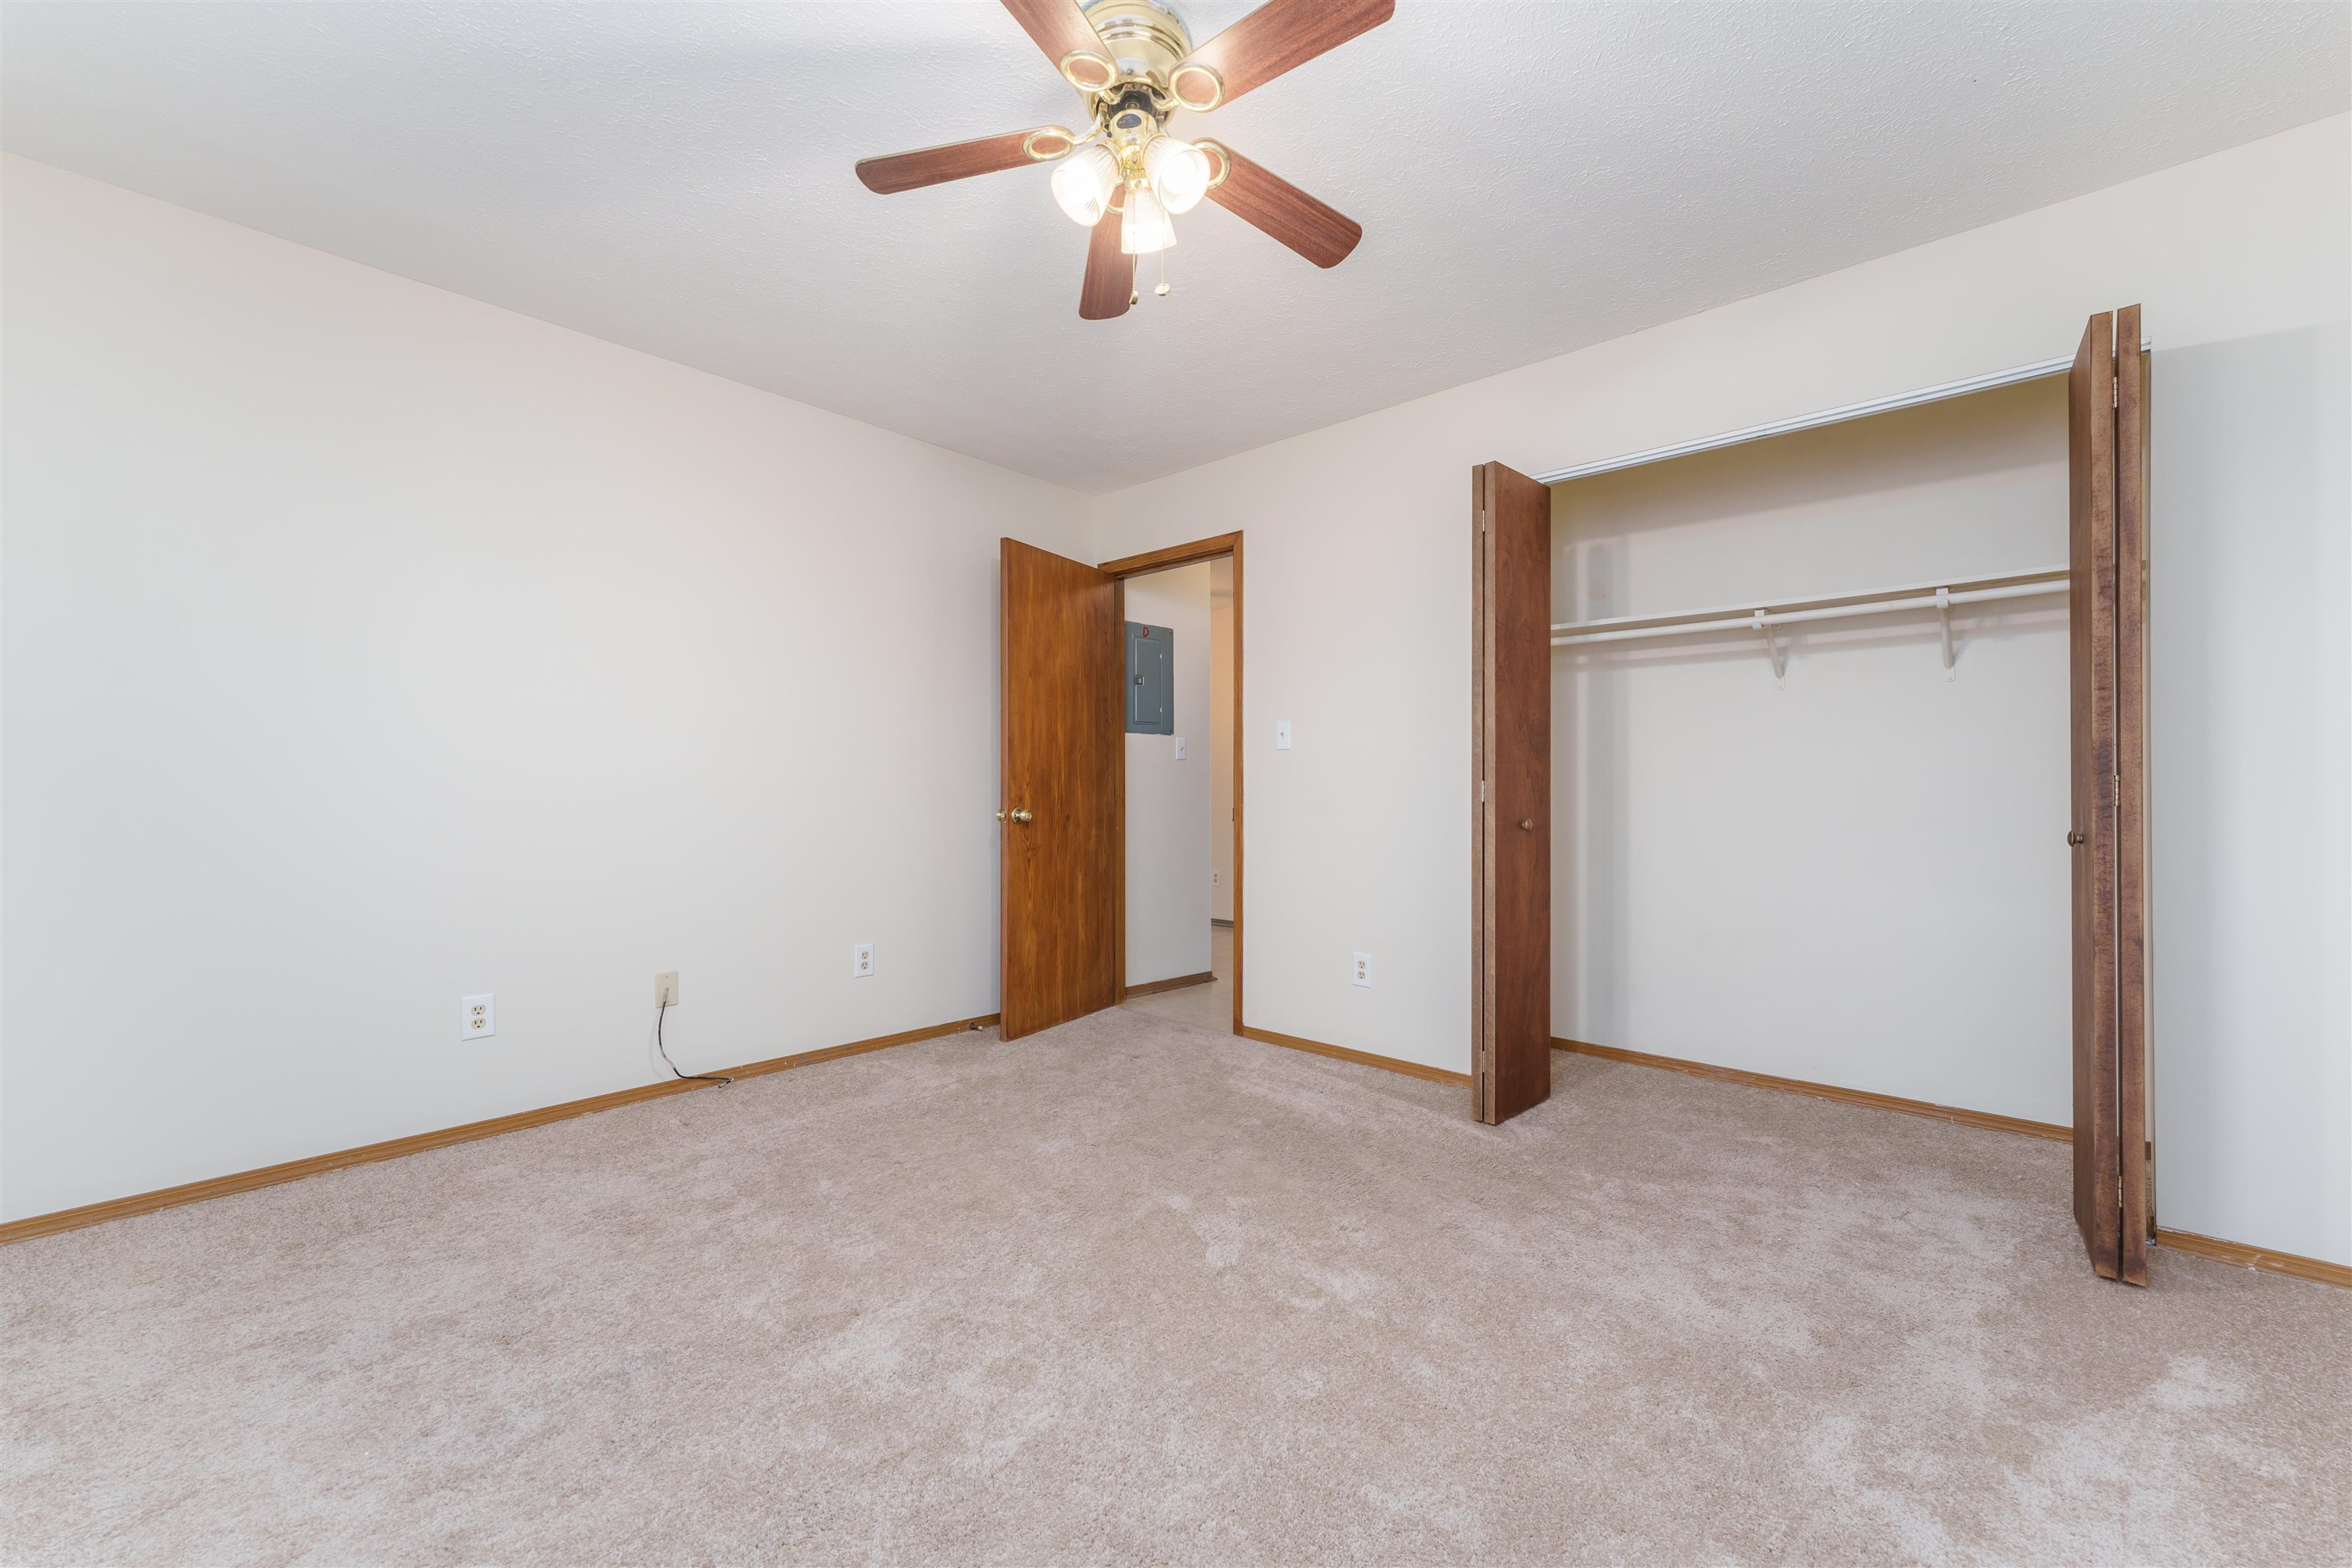 1301 Bowie Trail, Owensboro, Kentucky 42303, 1 Bedroom Bedrooms, ,1 BathroomBathrooms,Apartment,For Sale,Bowie Trail,88604